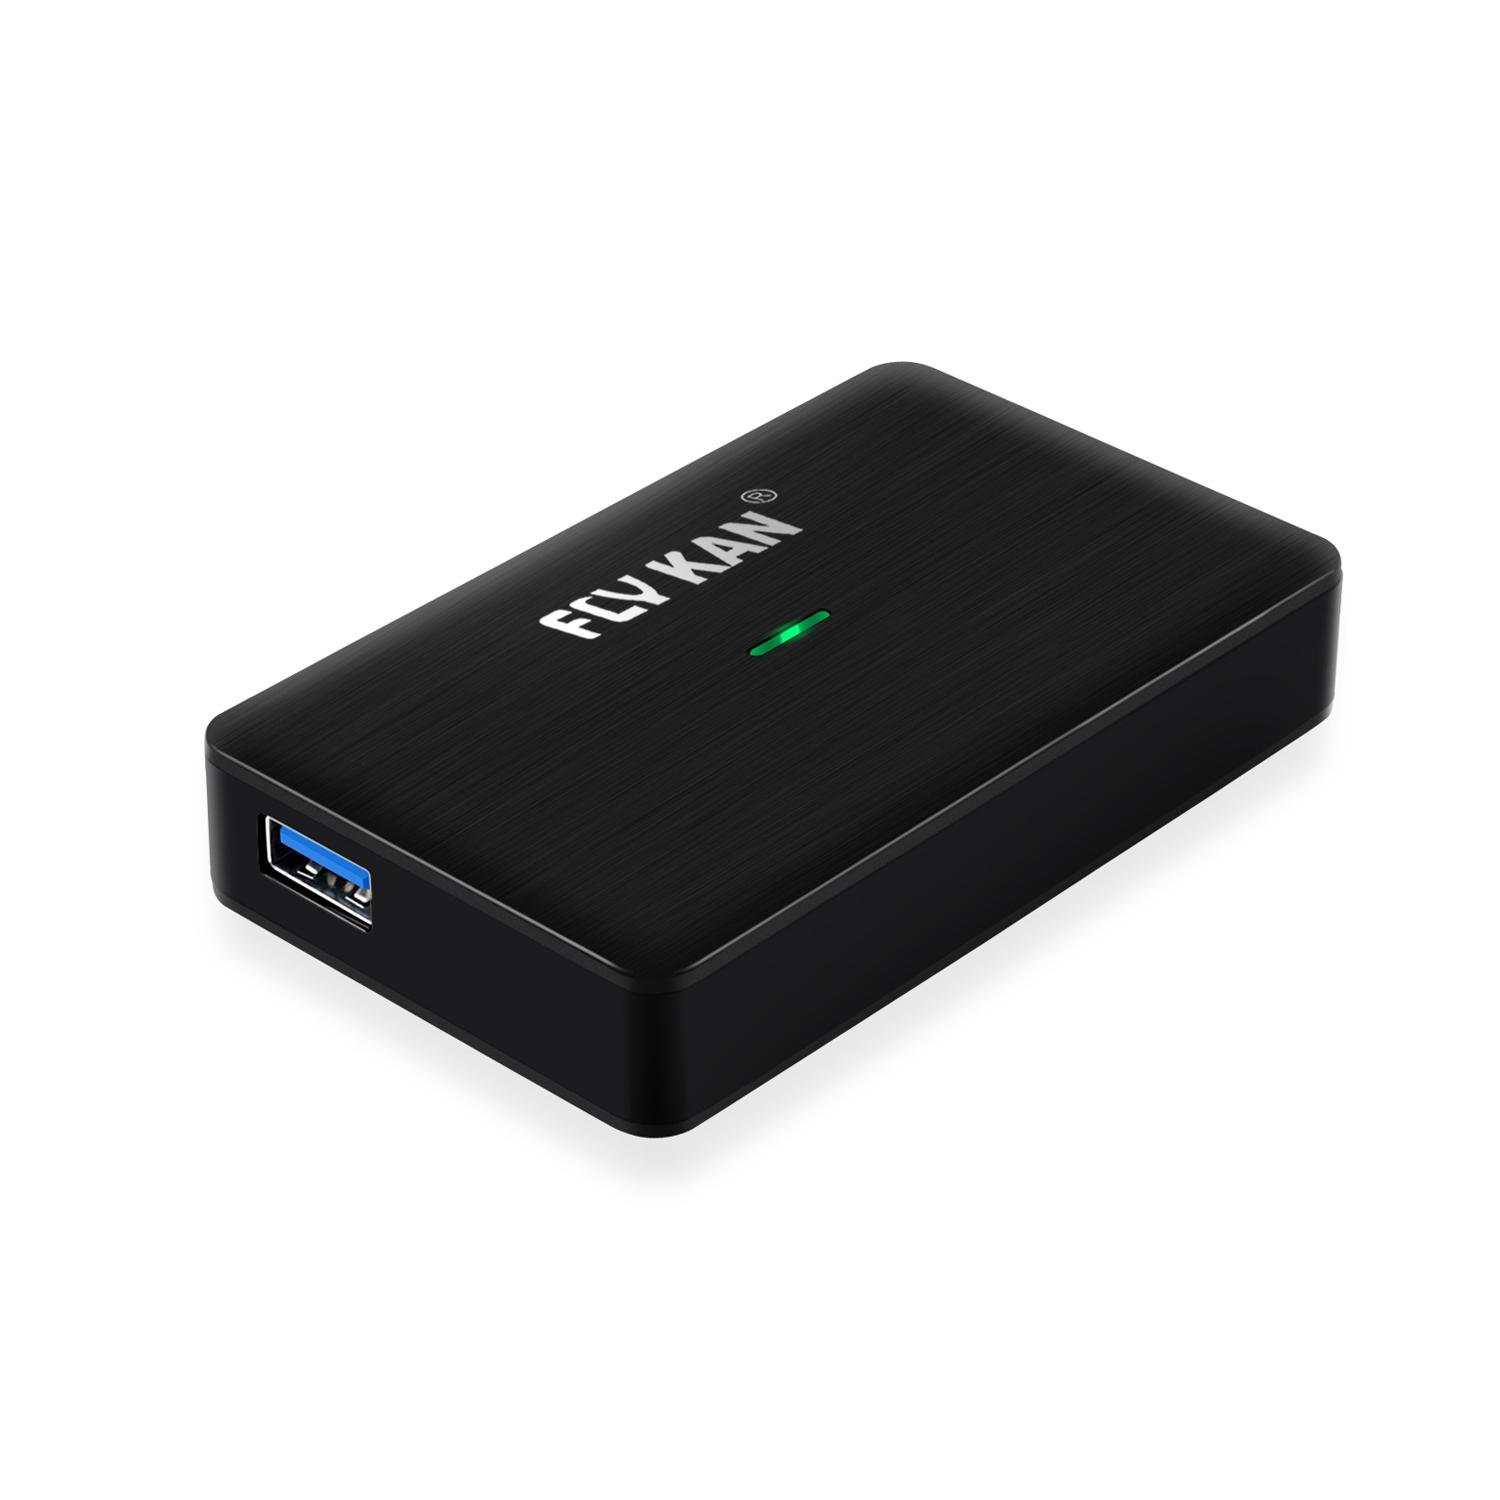 HDMI to USB3.0 Game recorder box for PS4